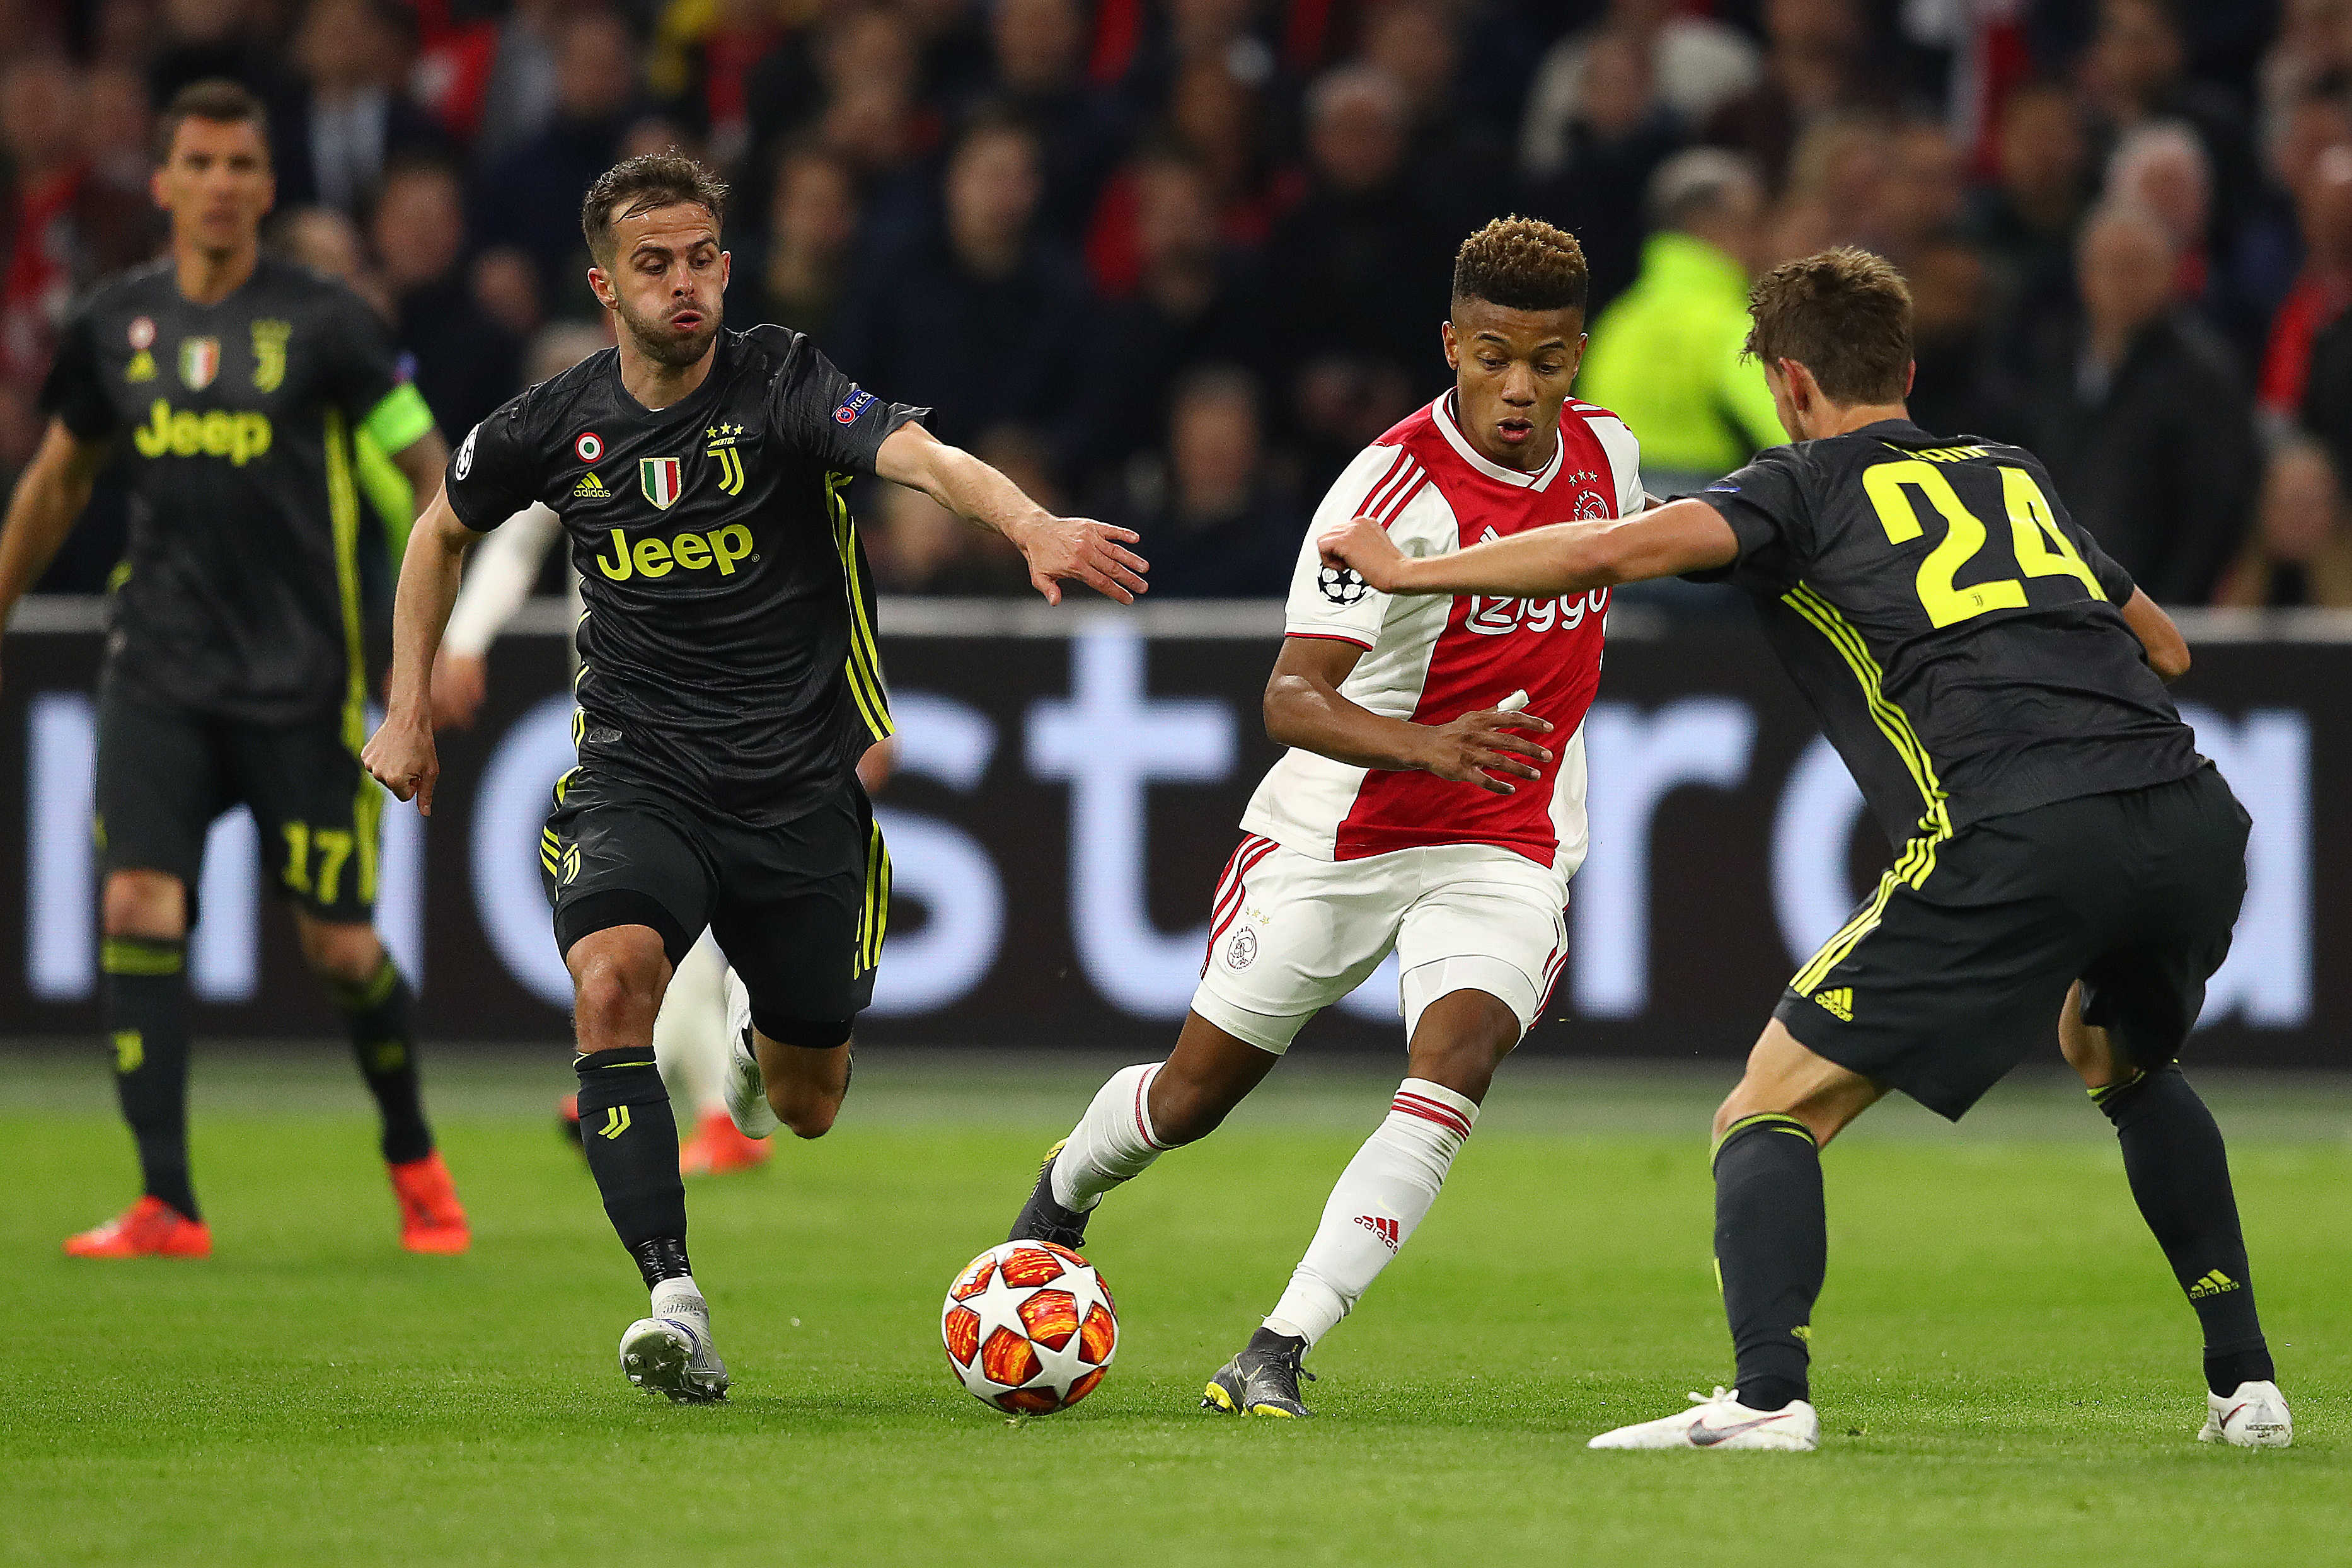 AMSTERDAM, NETHERLANDS - APRIL 10:  David Neres of Ajax tracked by Miralem Pjanic (L) and Daniele Rugani (R) of Juventus during the UEFA Champions League Quarter Final first leg match between Ajax and Juventus at Johan Cruyff Arena on April 10, 2019 in Amsterdam, Netherlands. (Photo by Michael Steele/Getty Images)